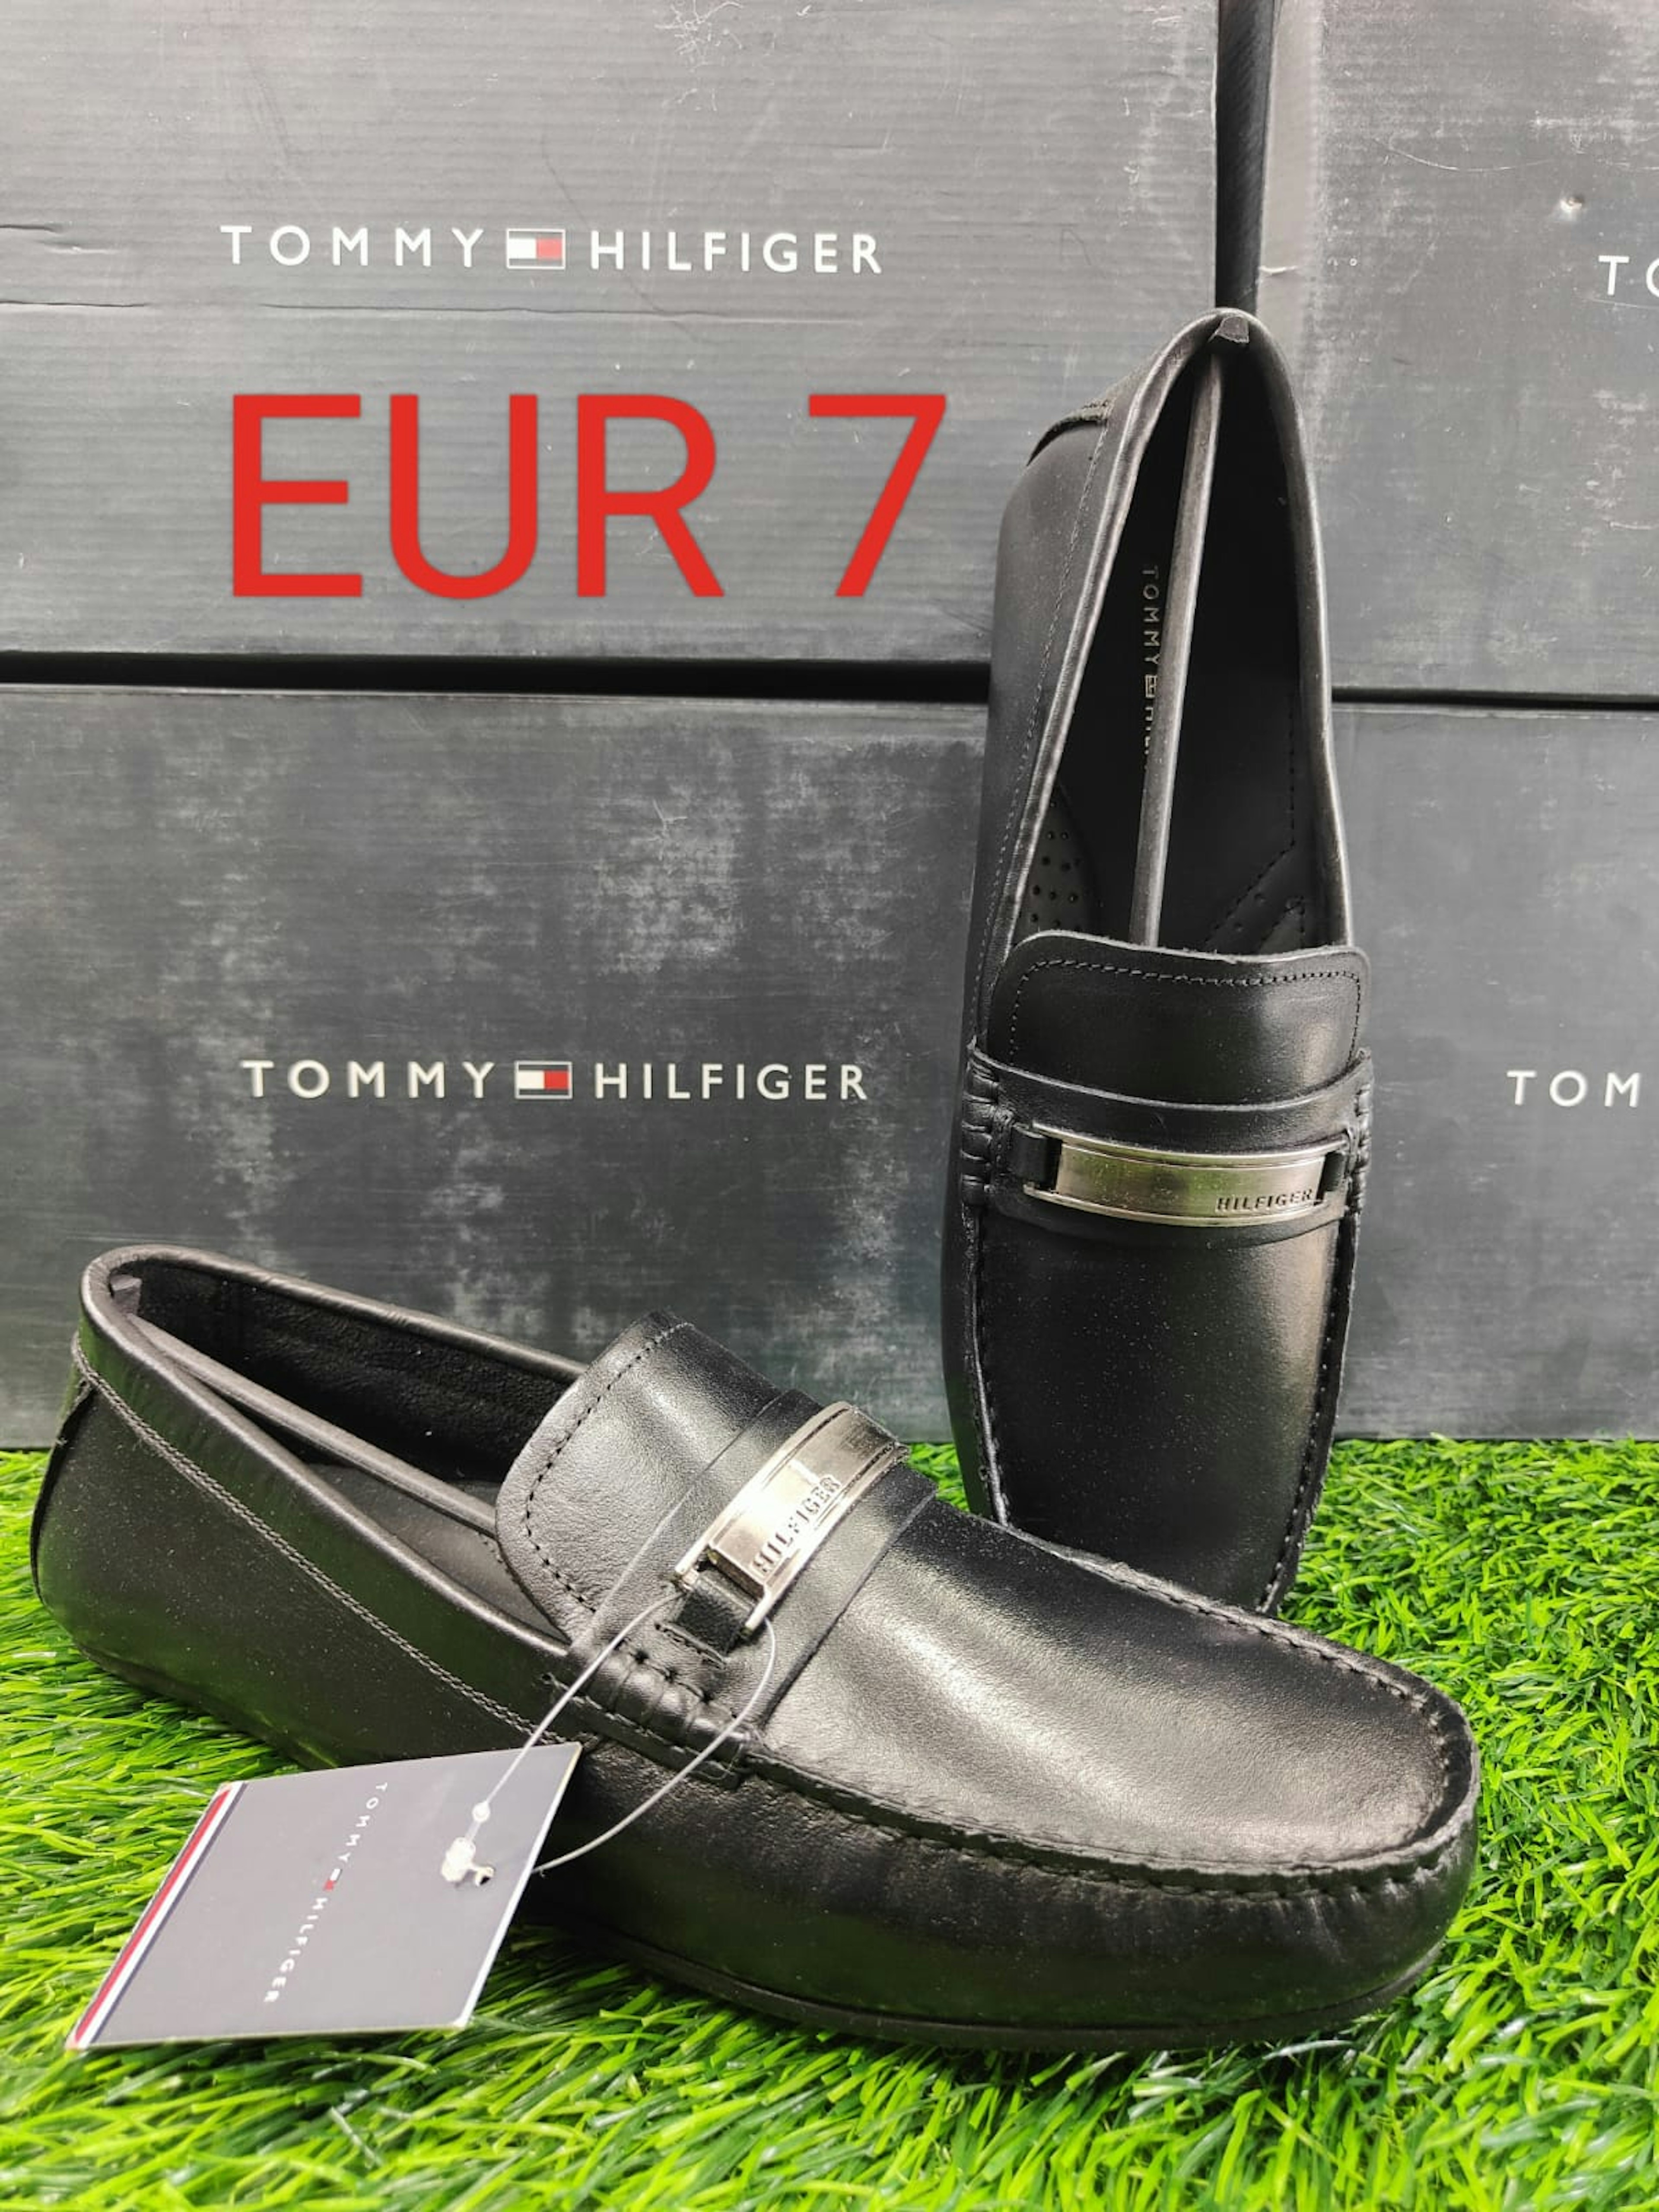 View - TOMMY HILFIGER lofar shoes photos, TOMMY HILFIGER lofar shoes available in Surendranagar, make deal in 3250